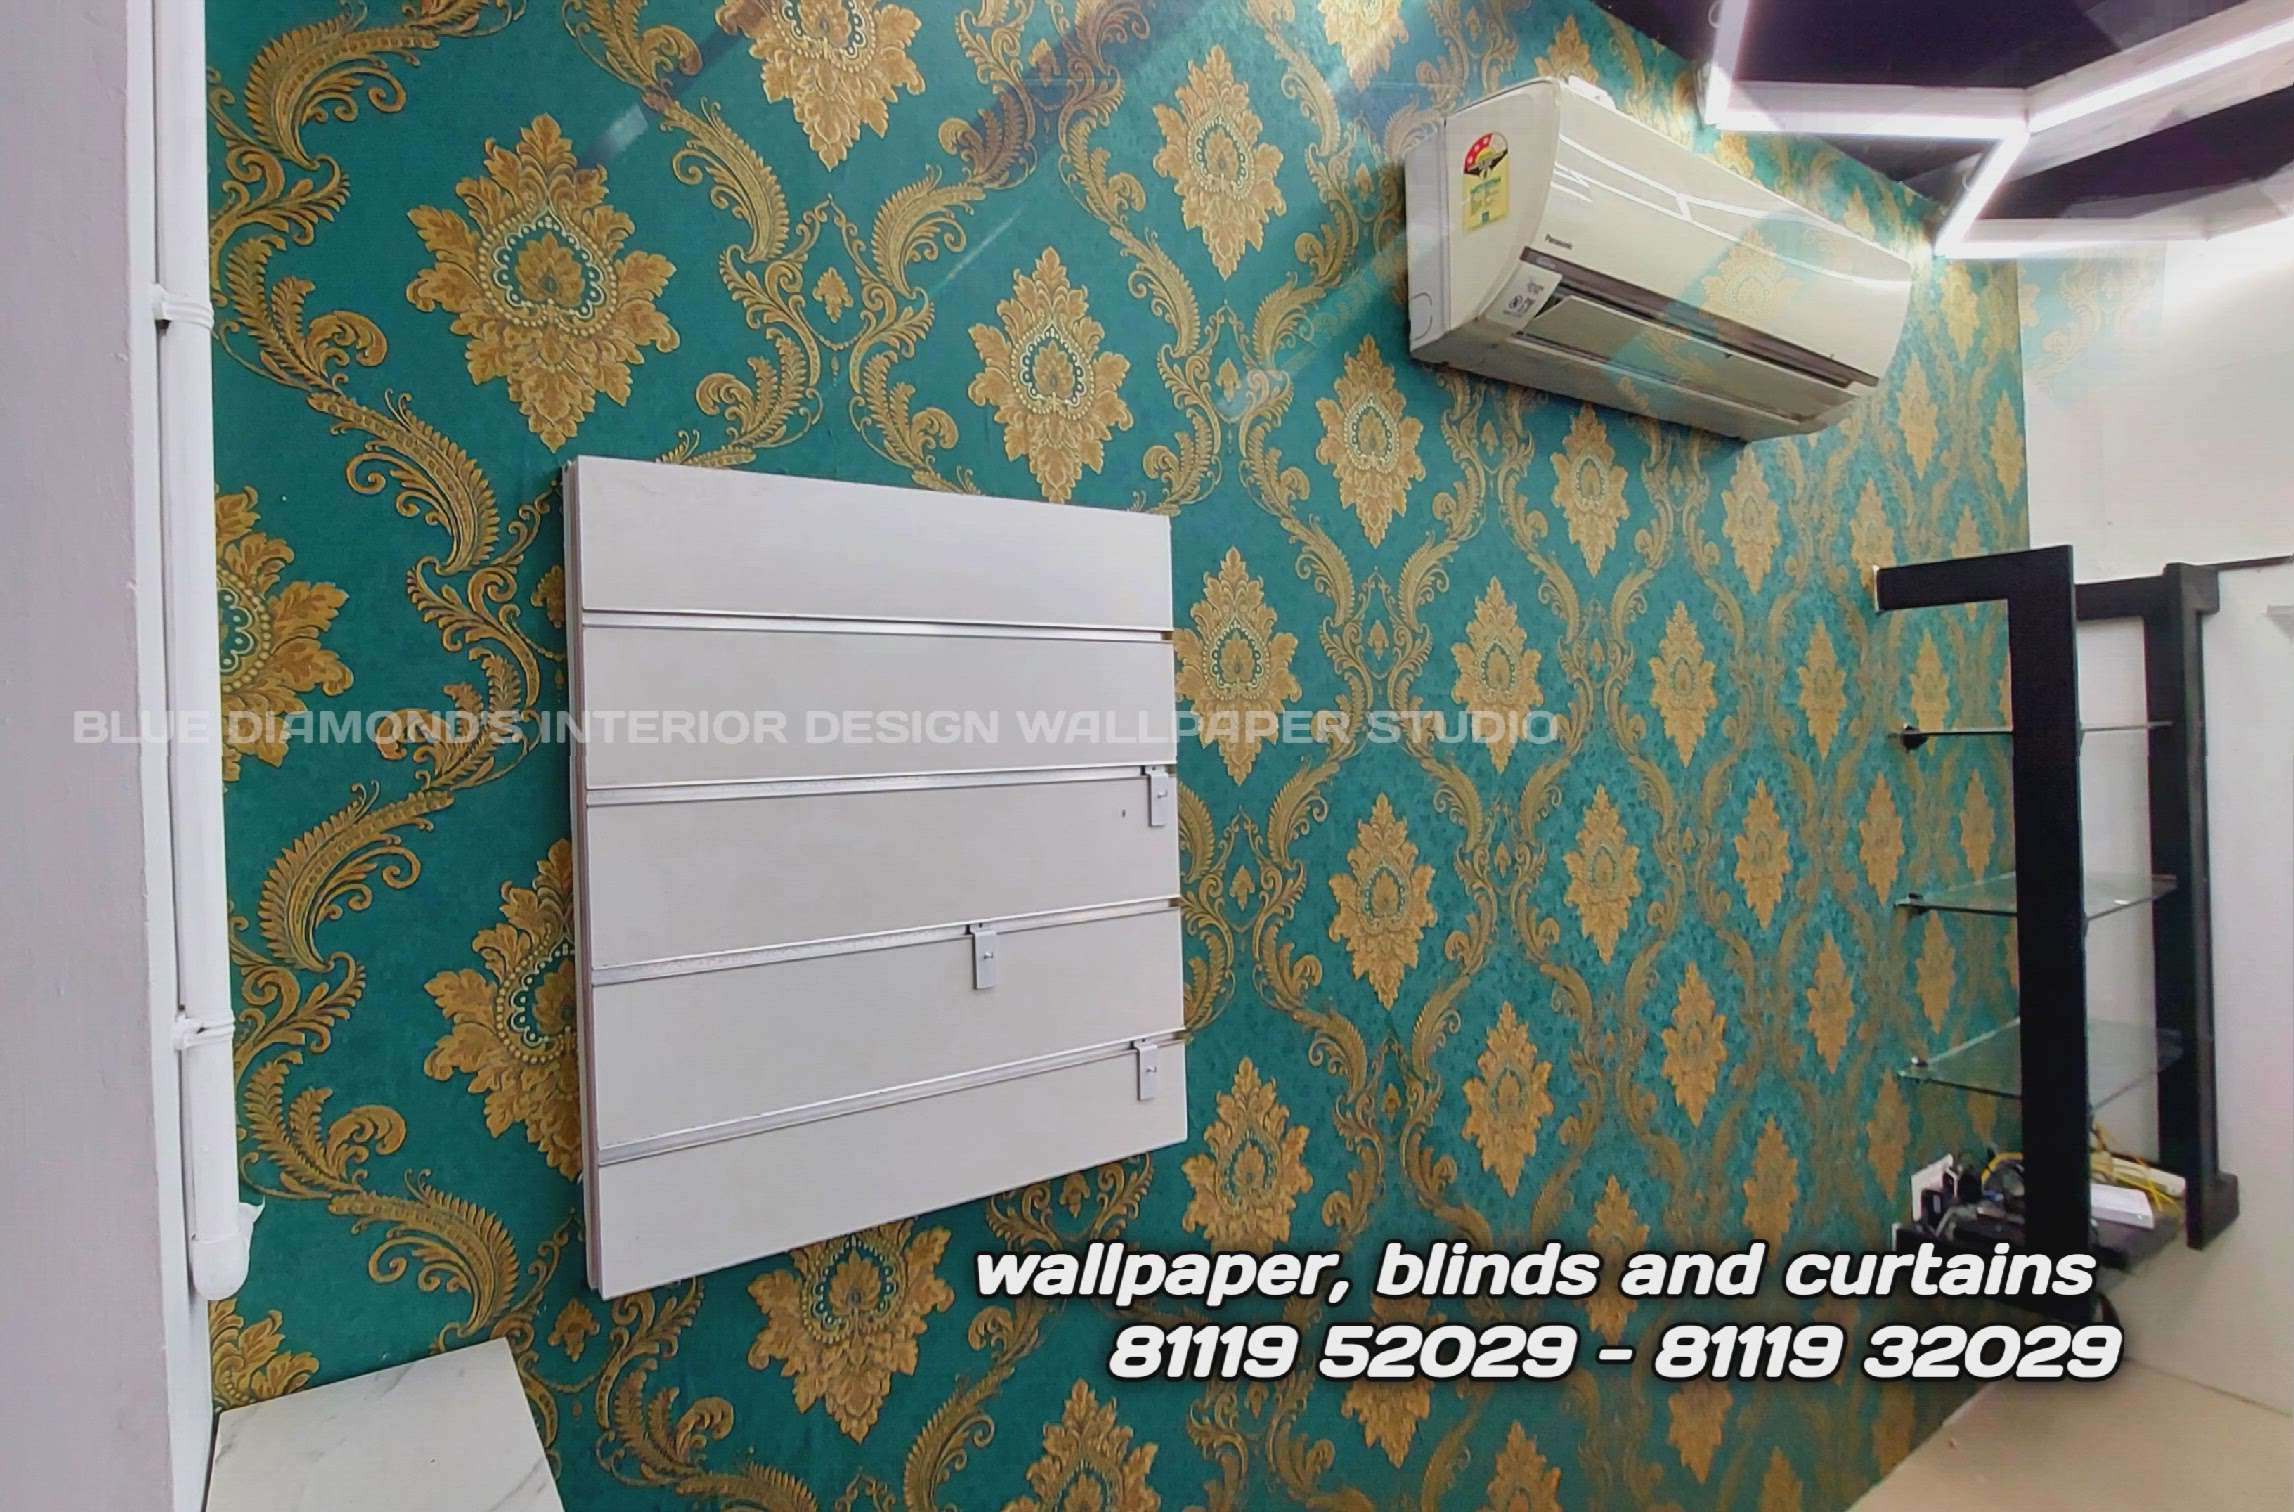 wallpaper, blinds and curtains installation 81119 52029- 81119 32029